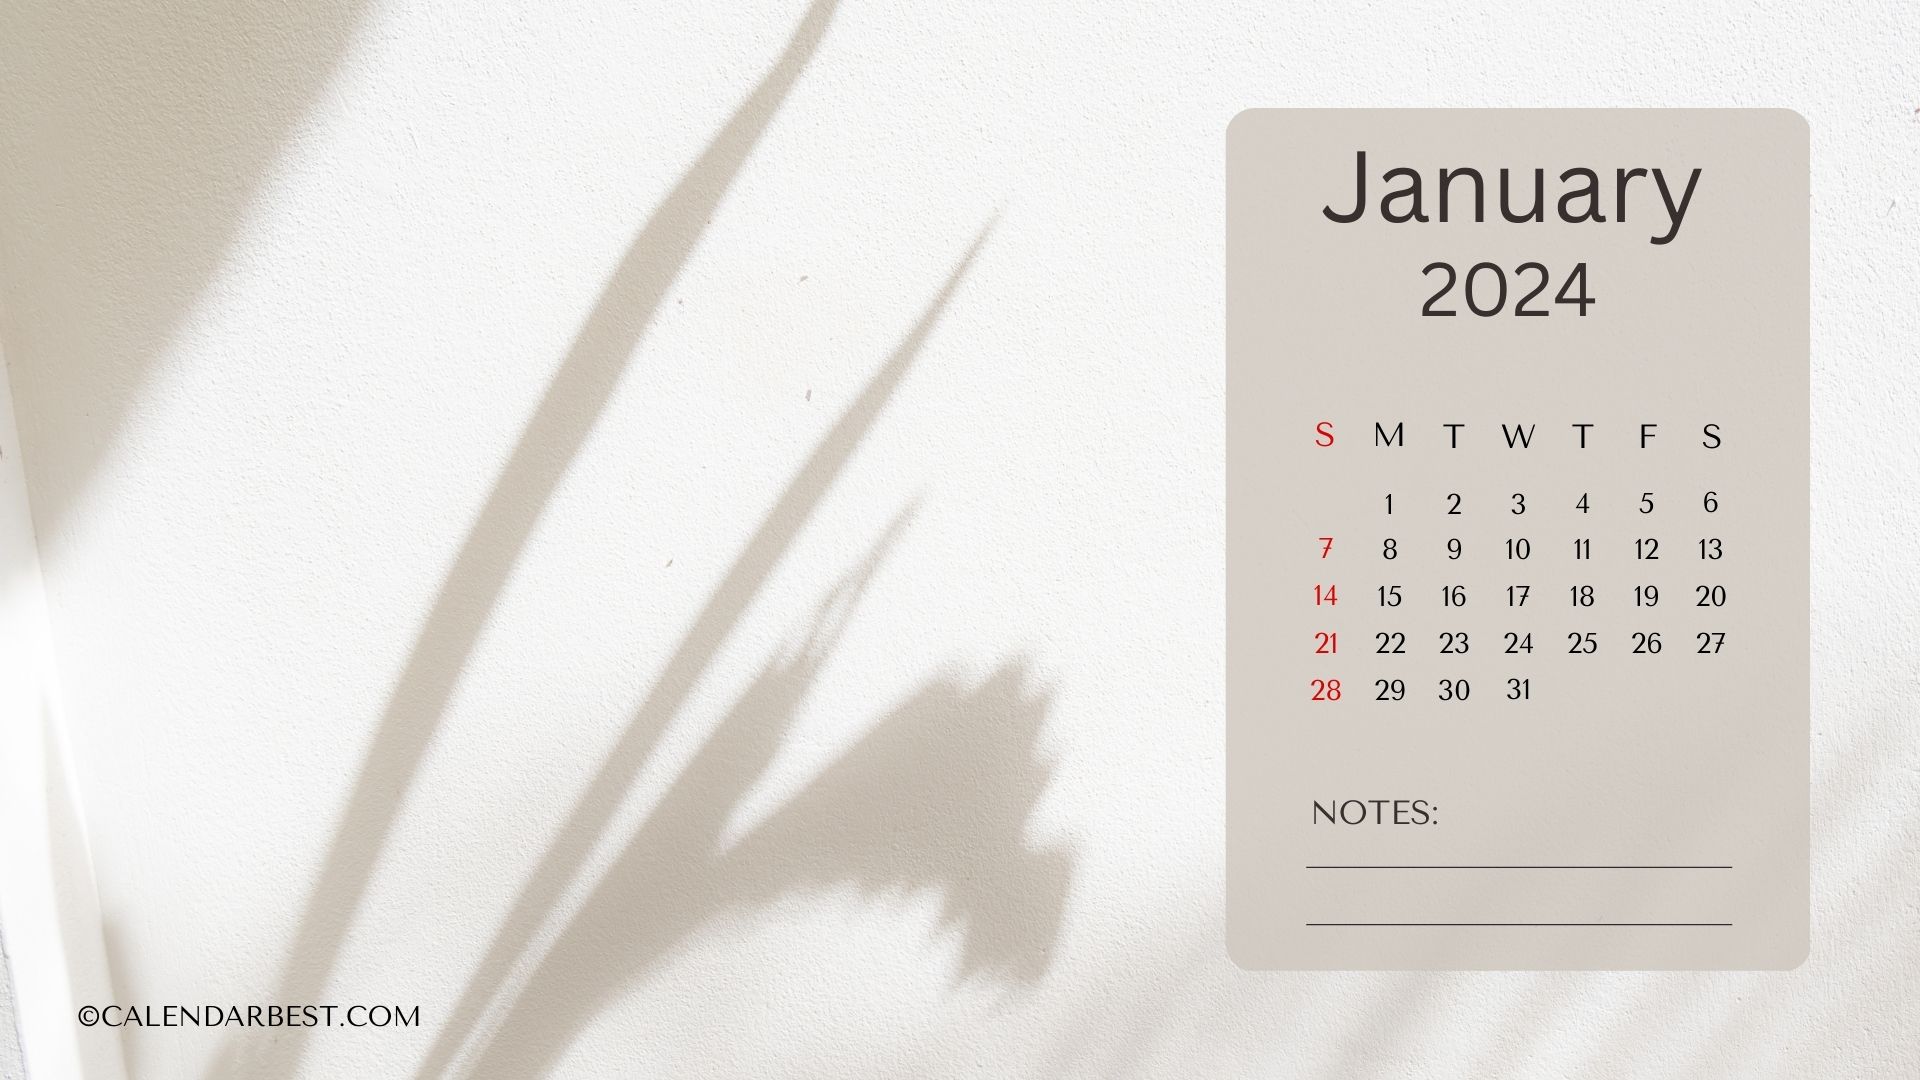 January Calendar 2024 with Notes